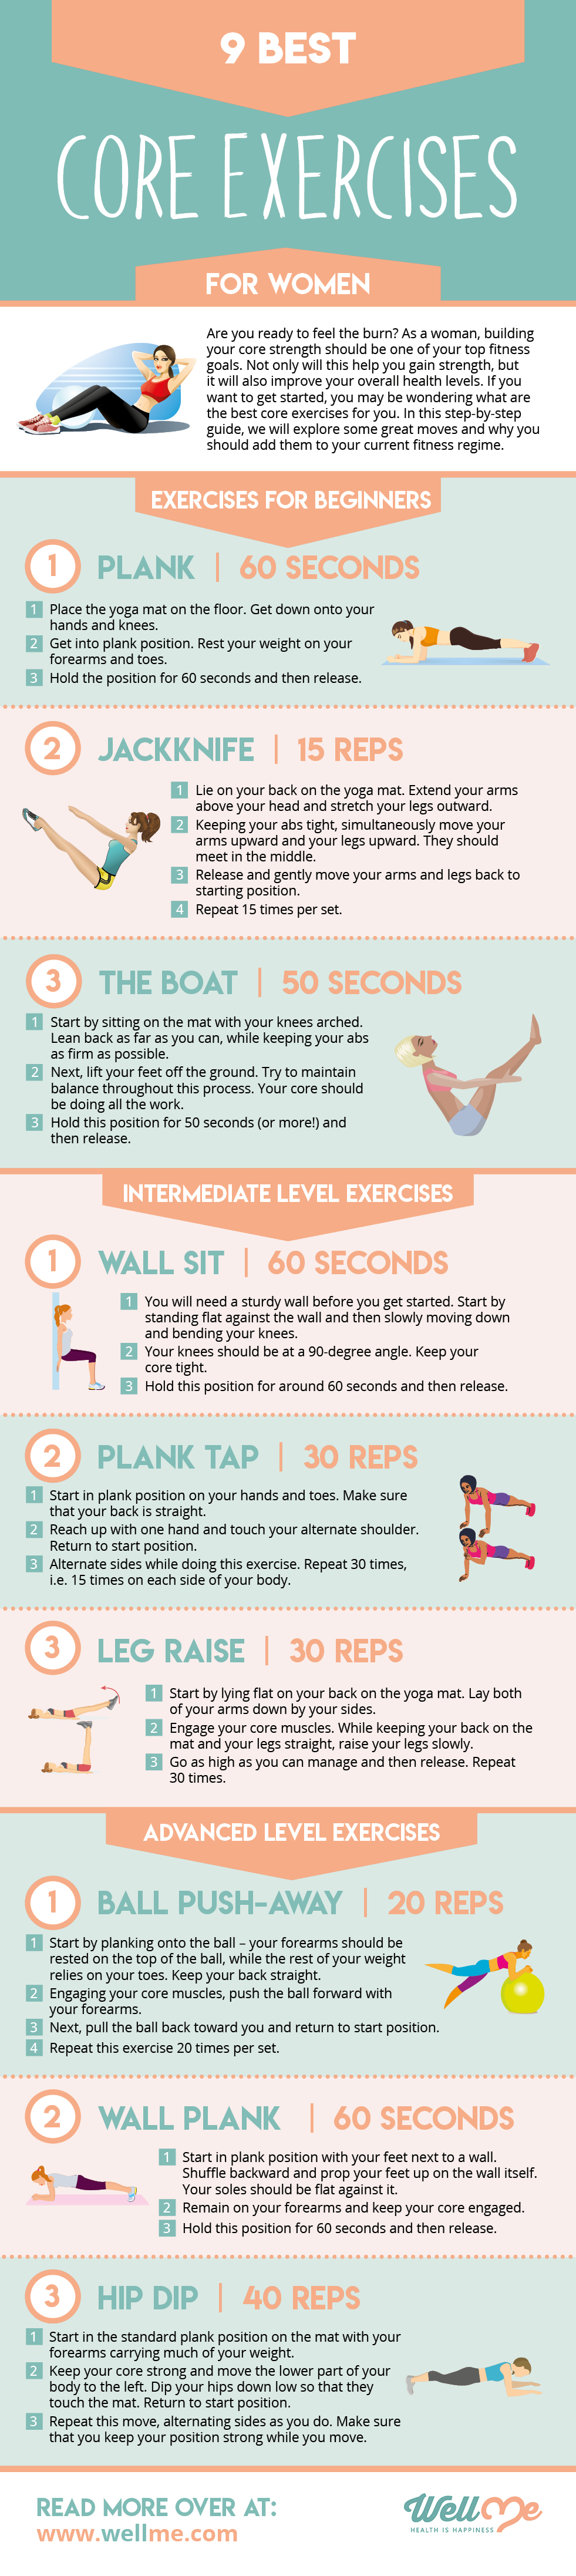 9 Best Core Exercises For Women Infographic